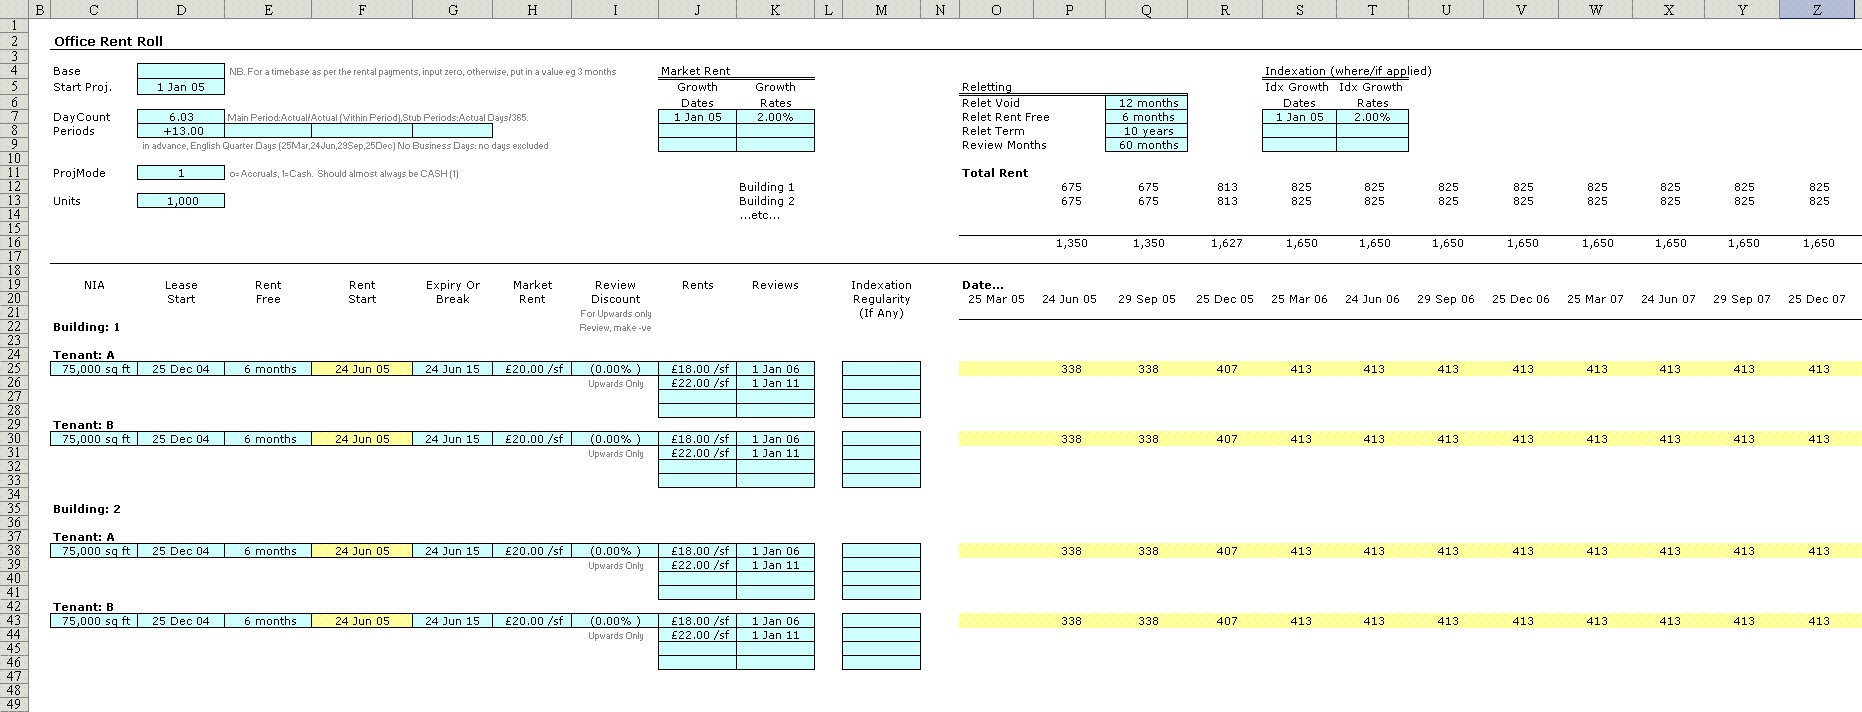 Business Functions Library For Excel Document Rent Roll Spreadsheet